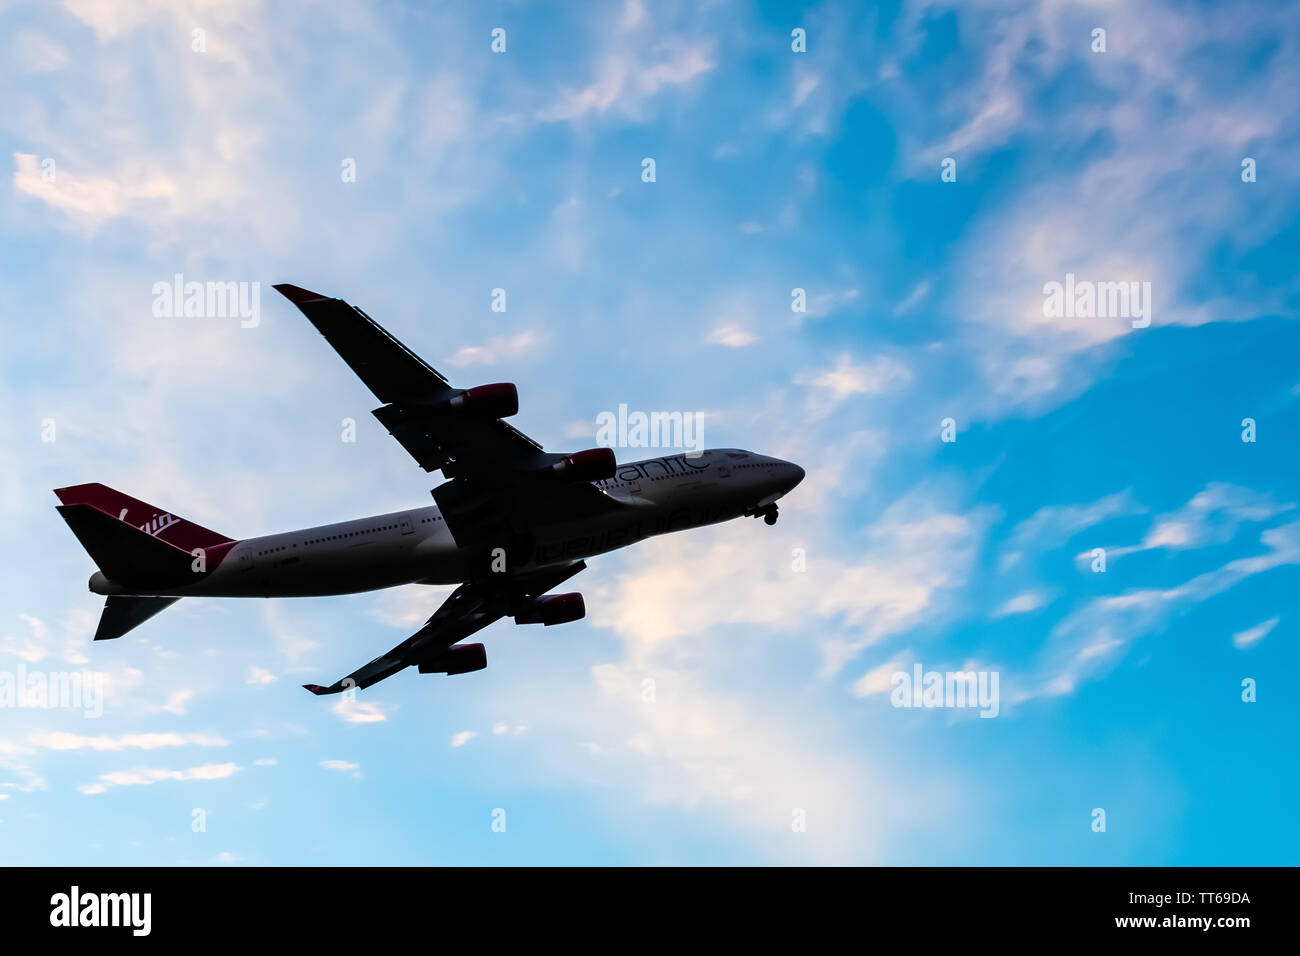 Montego Bay, Jamaica - May 21 2019: Virgin Atlantic Airlines Boeing 747-443 aircraft take off from Sangster International (MBJ) airport Stock Photo